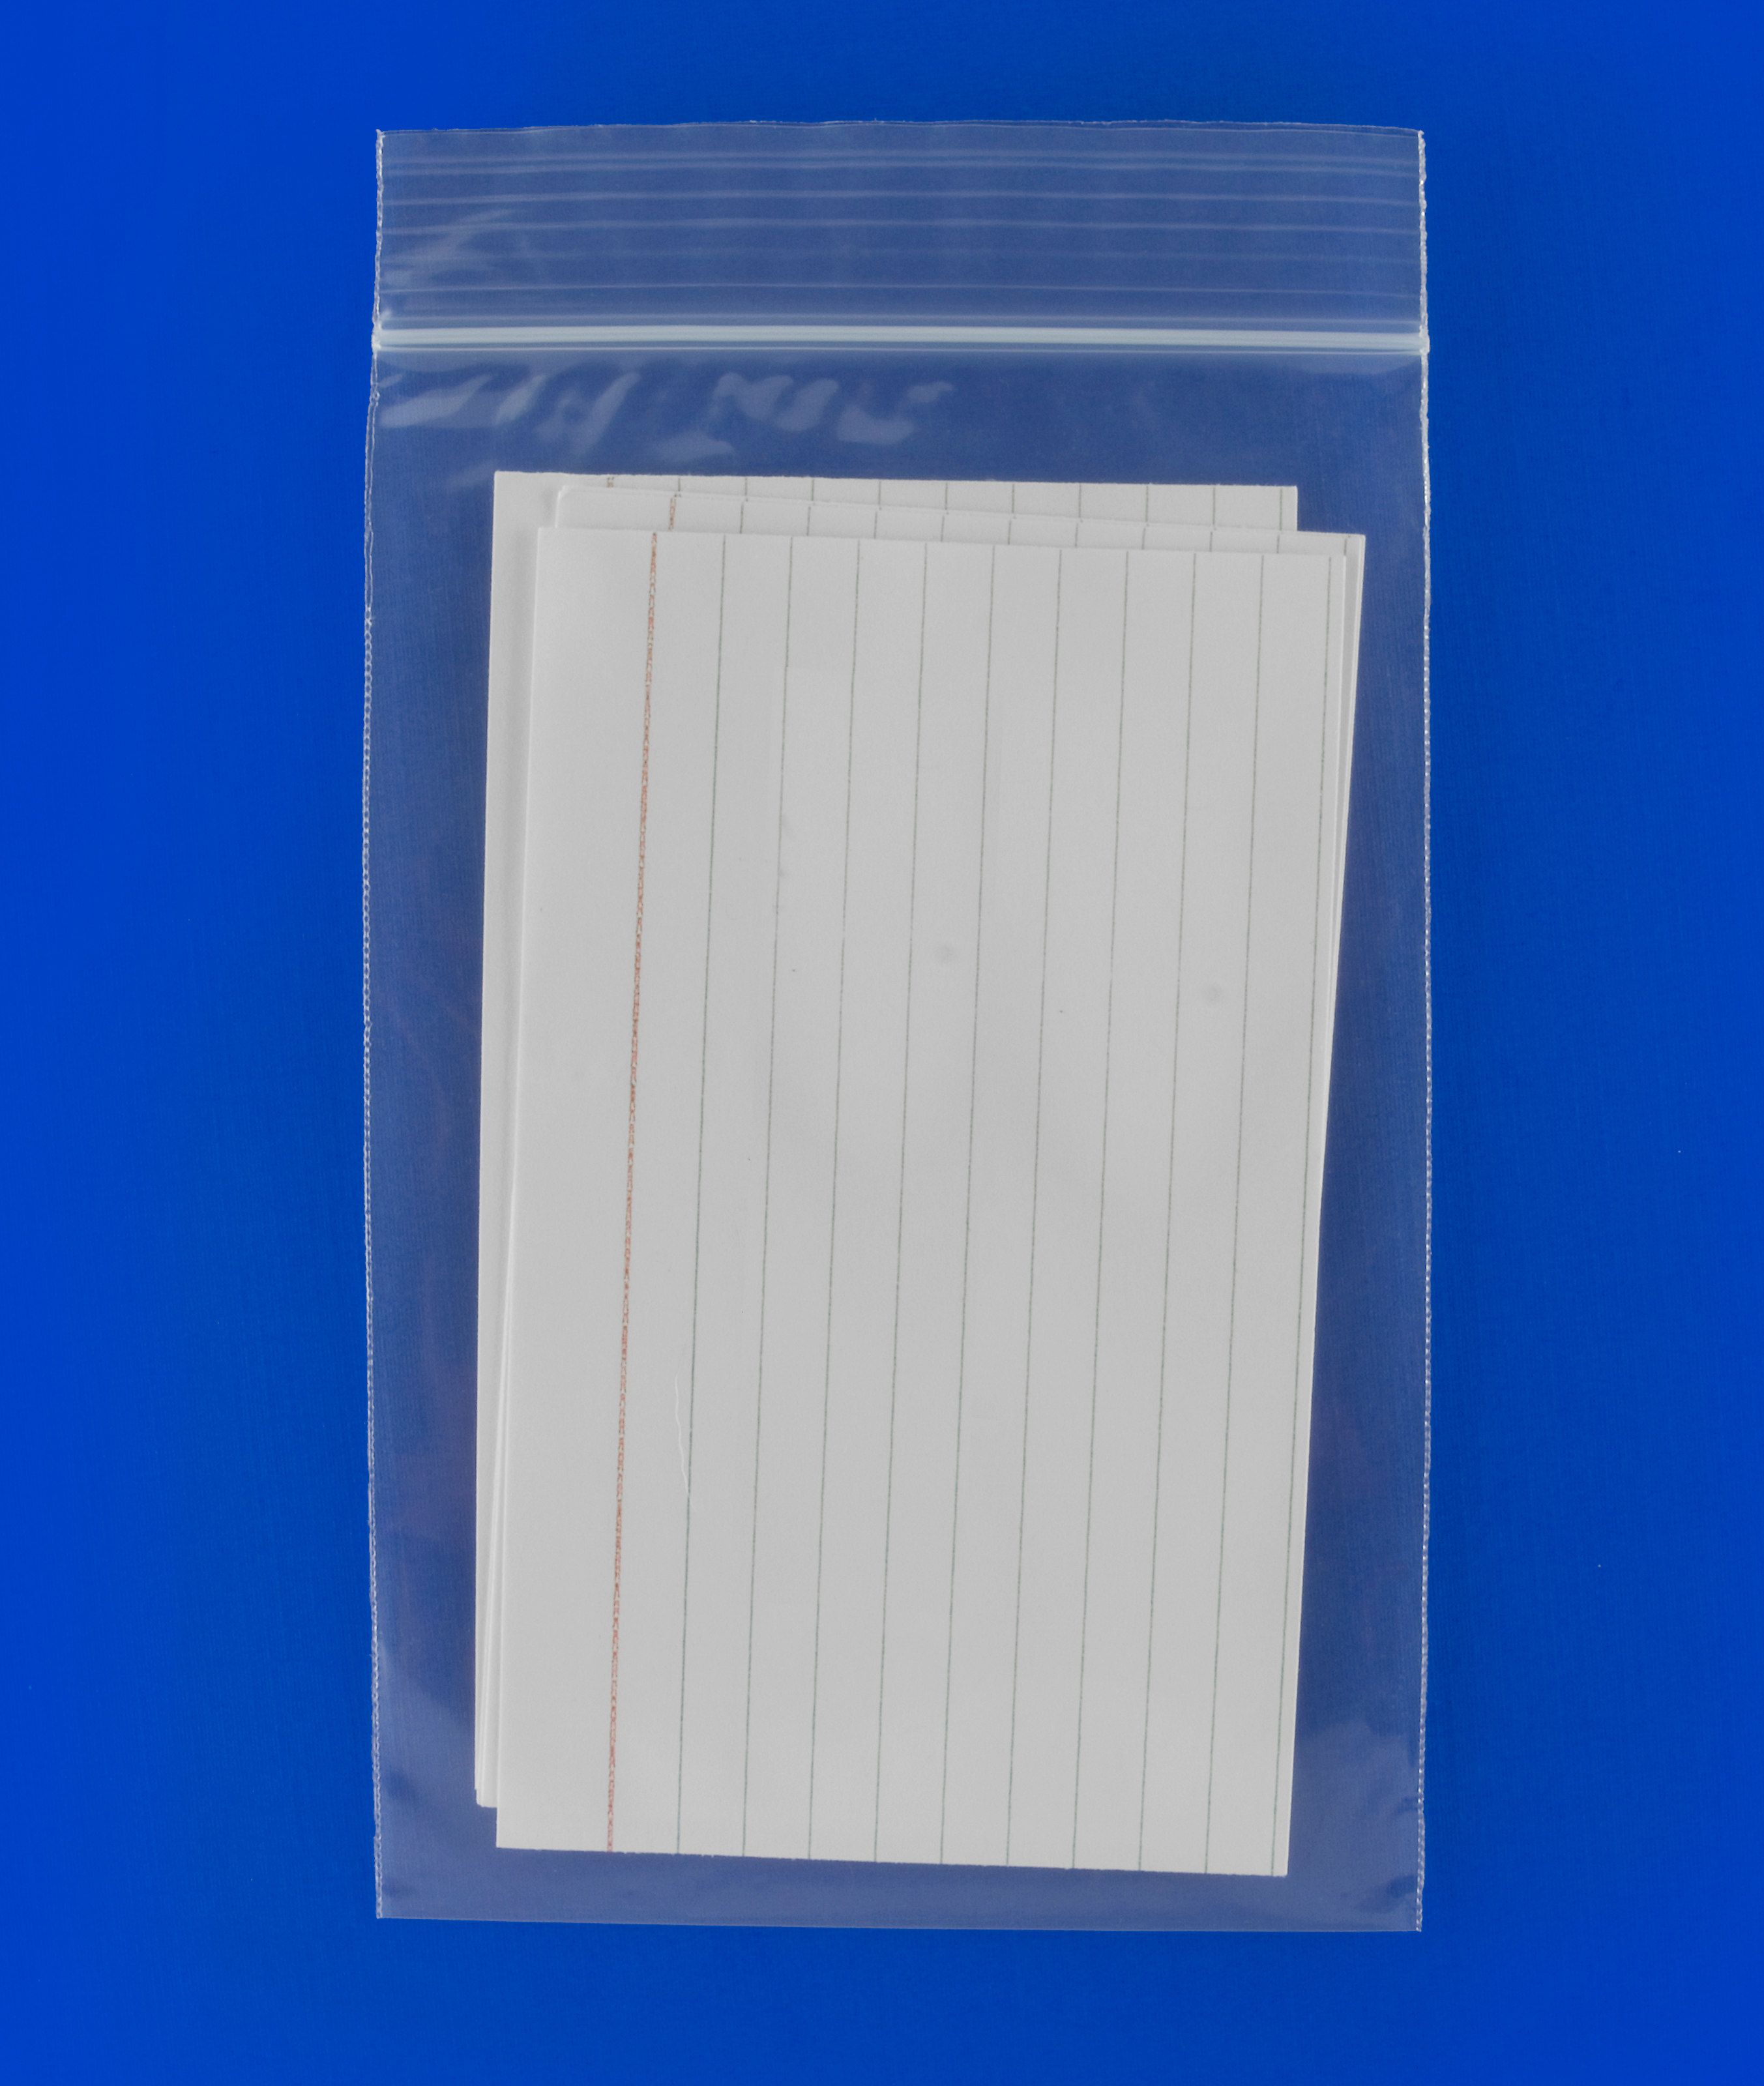 4 Mil Clear Reclosable Plastic Baggies Resealable Poly Bag 4 x 4 Inch 1000 Pack 